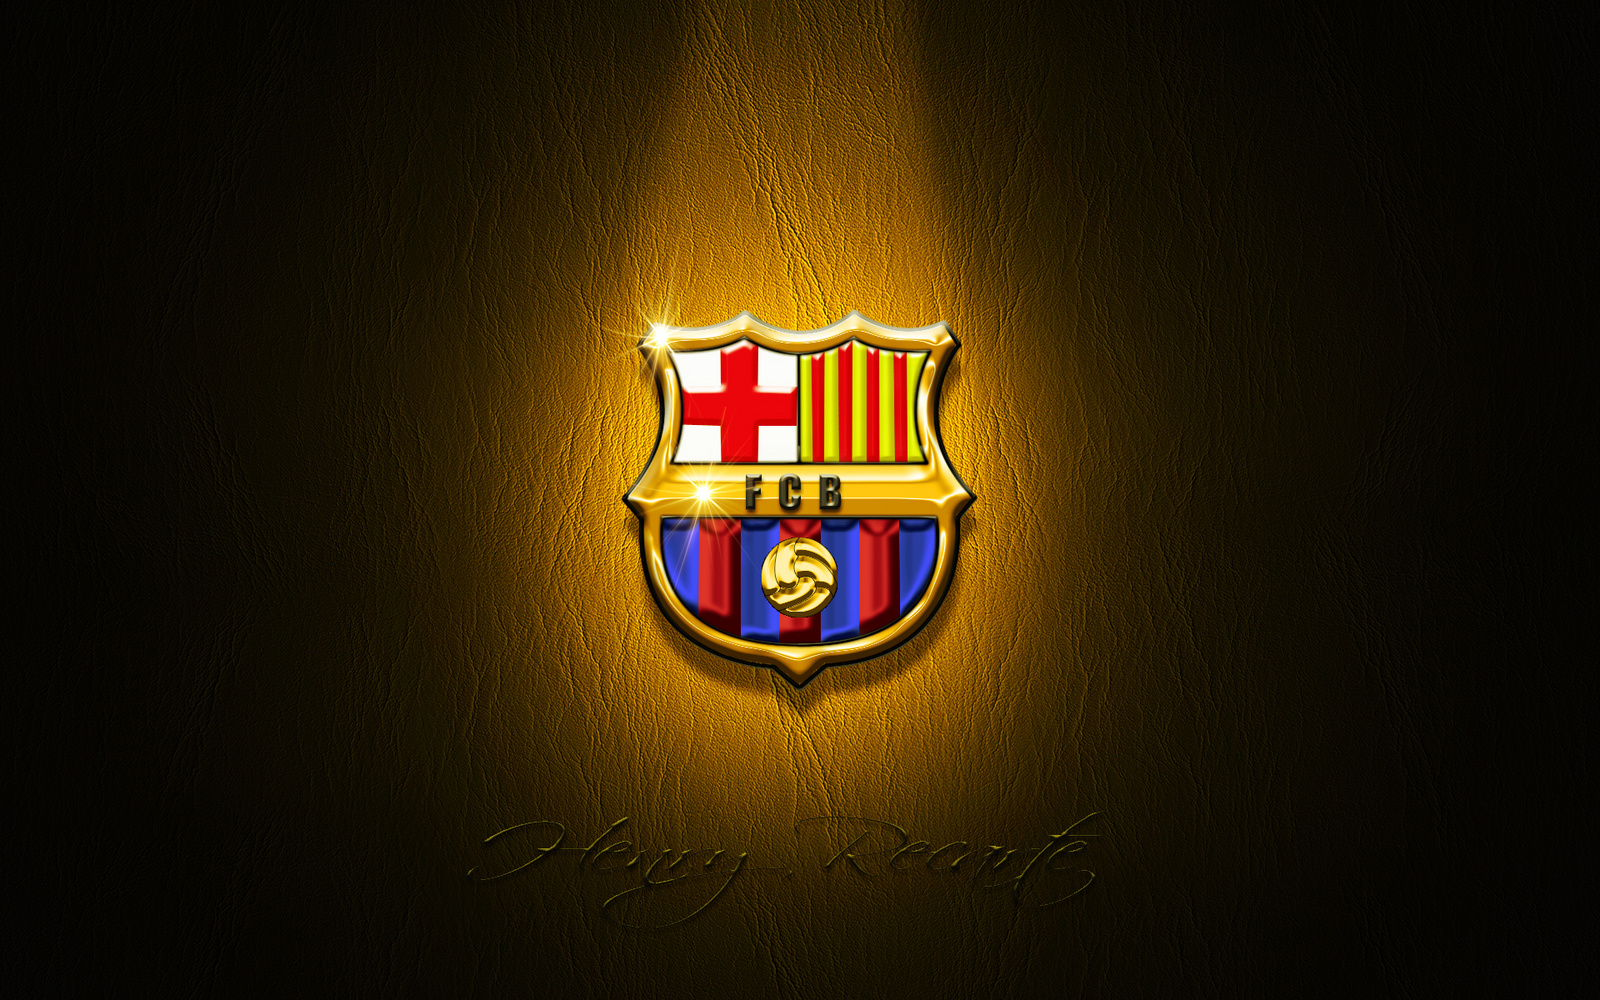 Every Thing Hd Wallpapers Fc Barcelona Soccer Club New Hd Wallpapers 2013